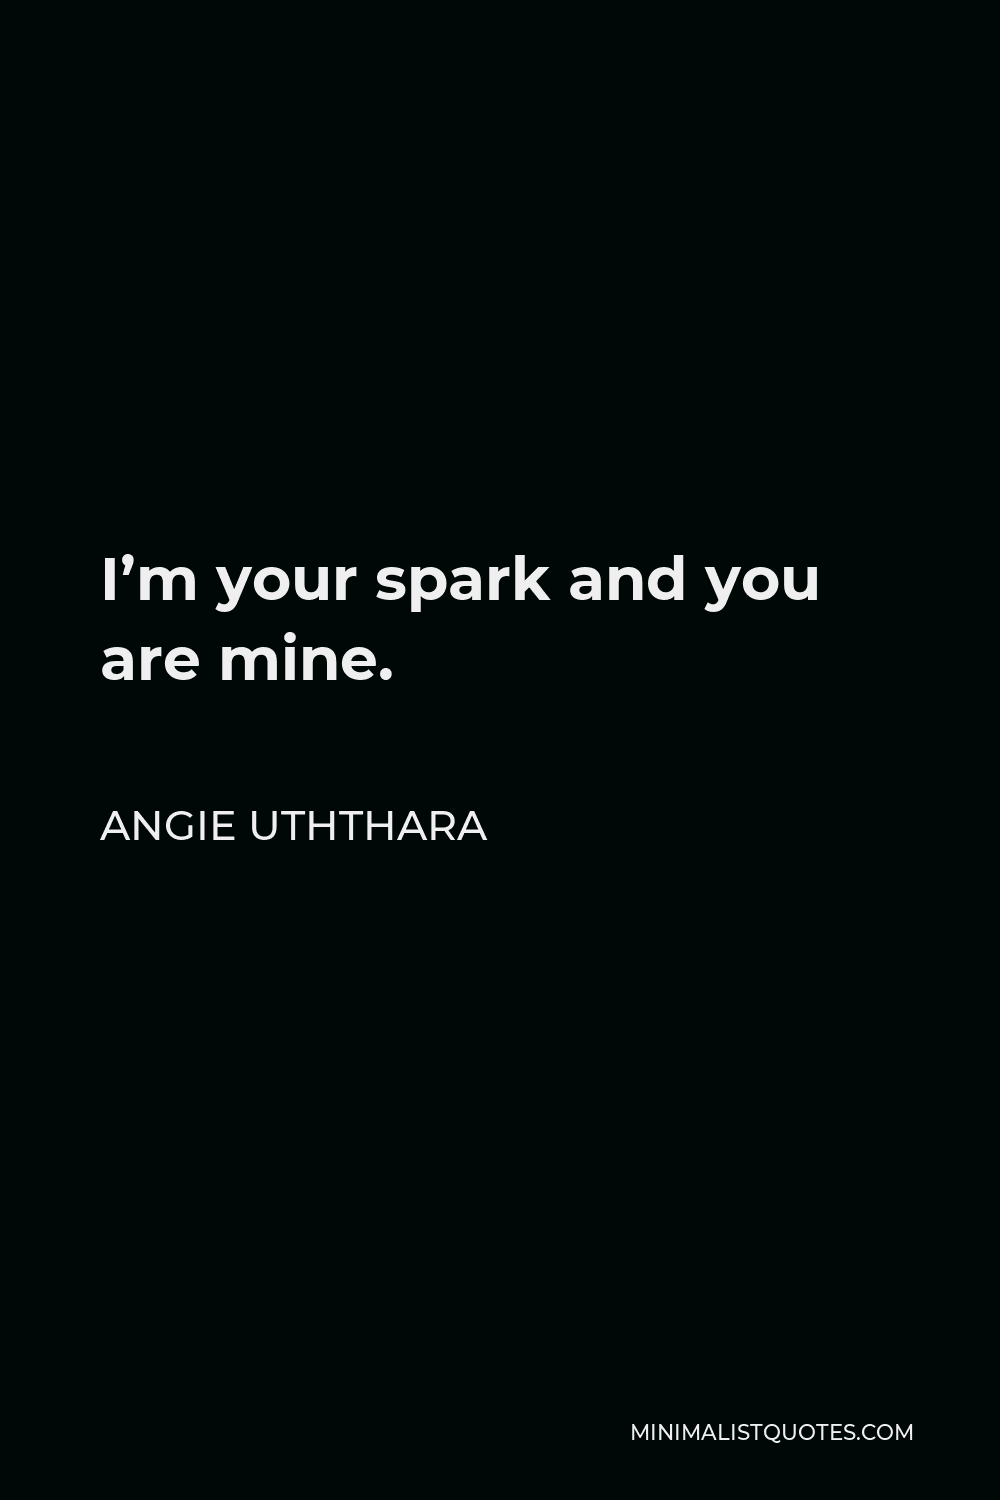 Angie Uththara Quote - I’m your spark and you are mine.